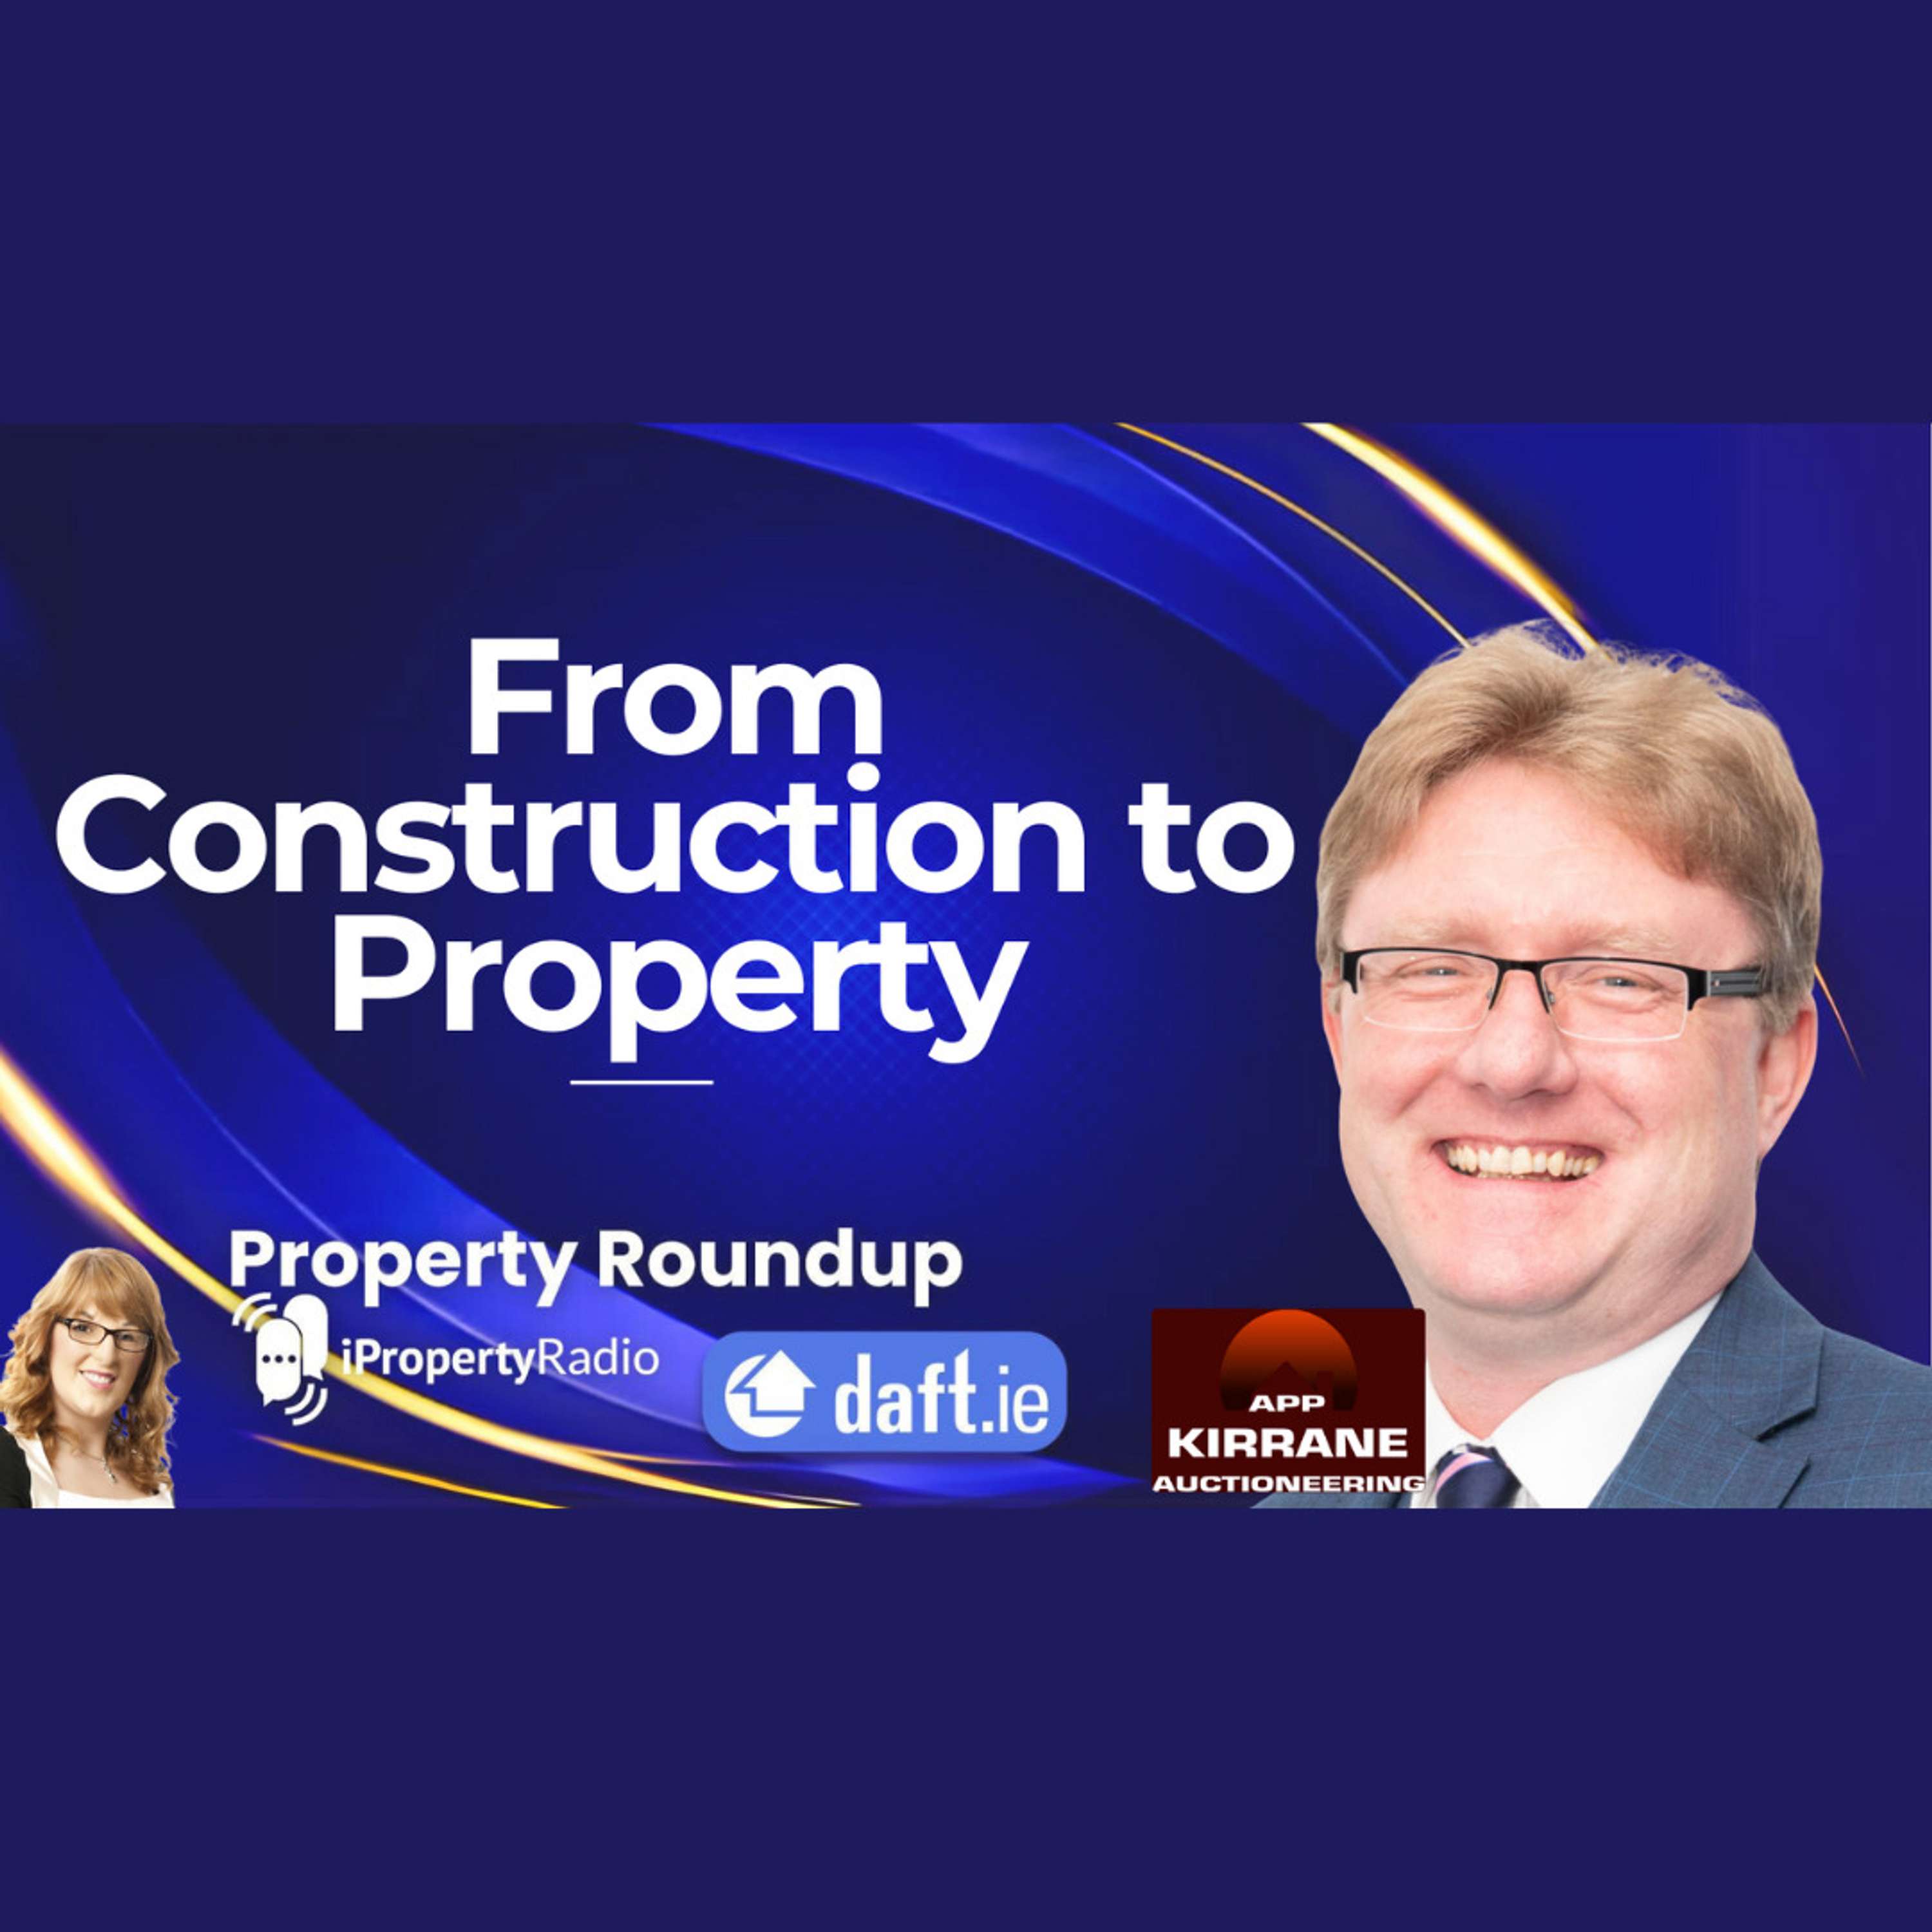 From Construction to Property